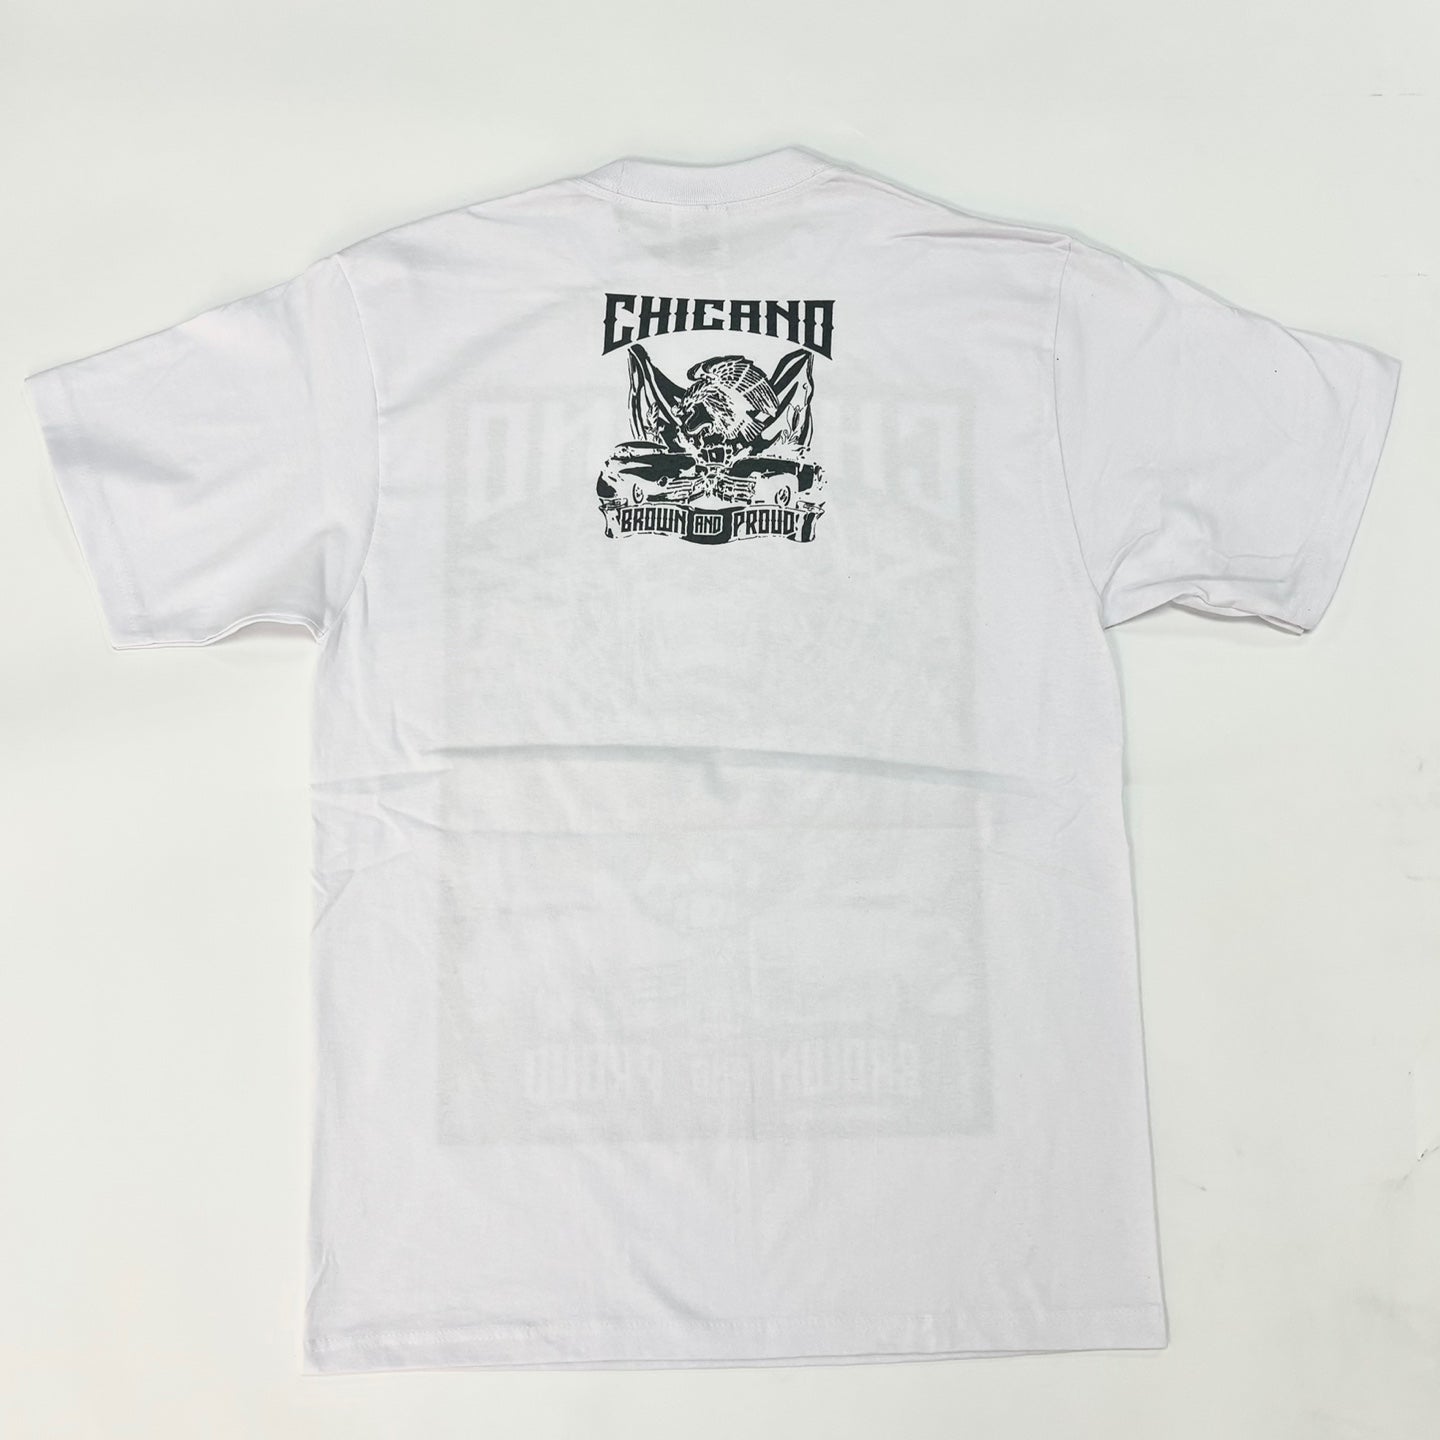 BILLIONAIRE Chicano Brown and Proud Heavyweight Graphic T-shirt